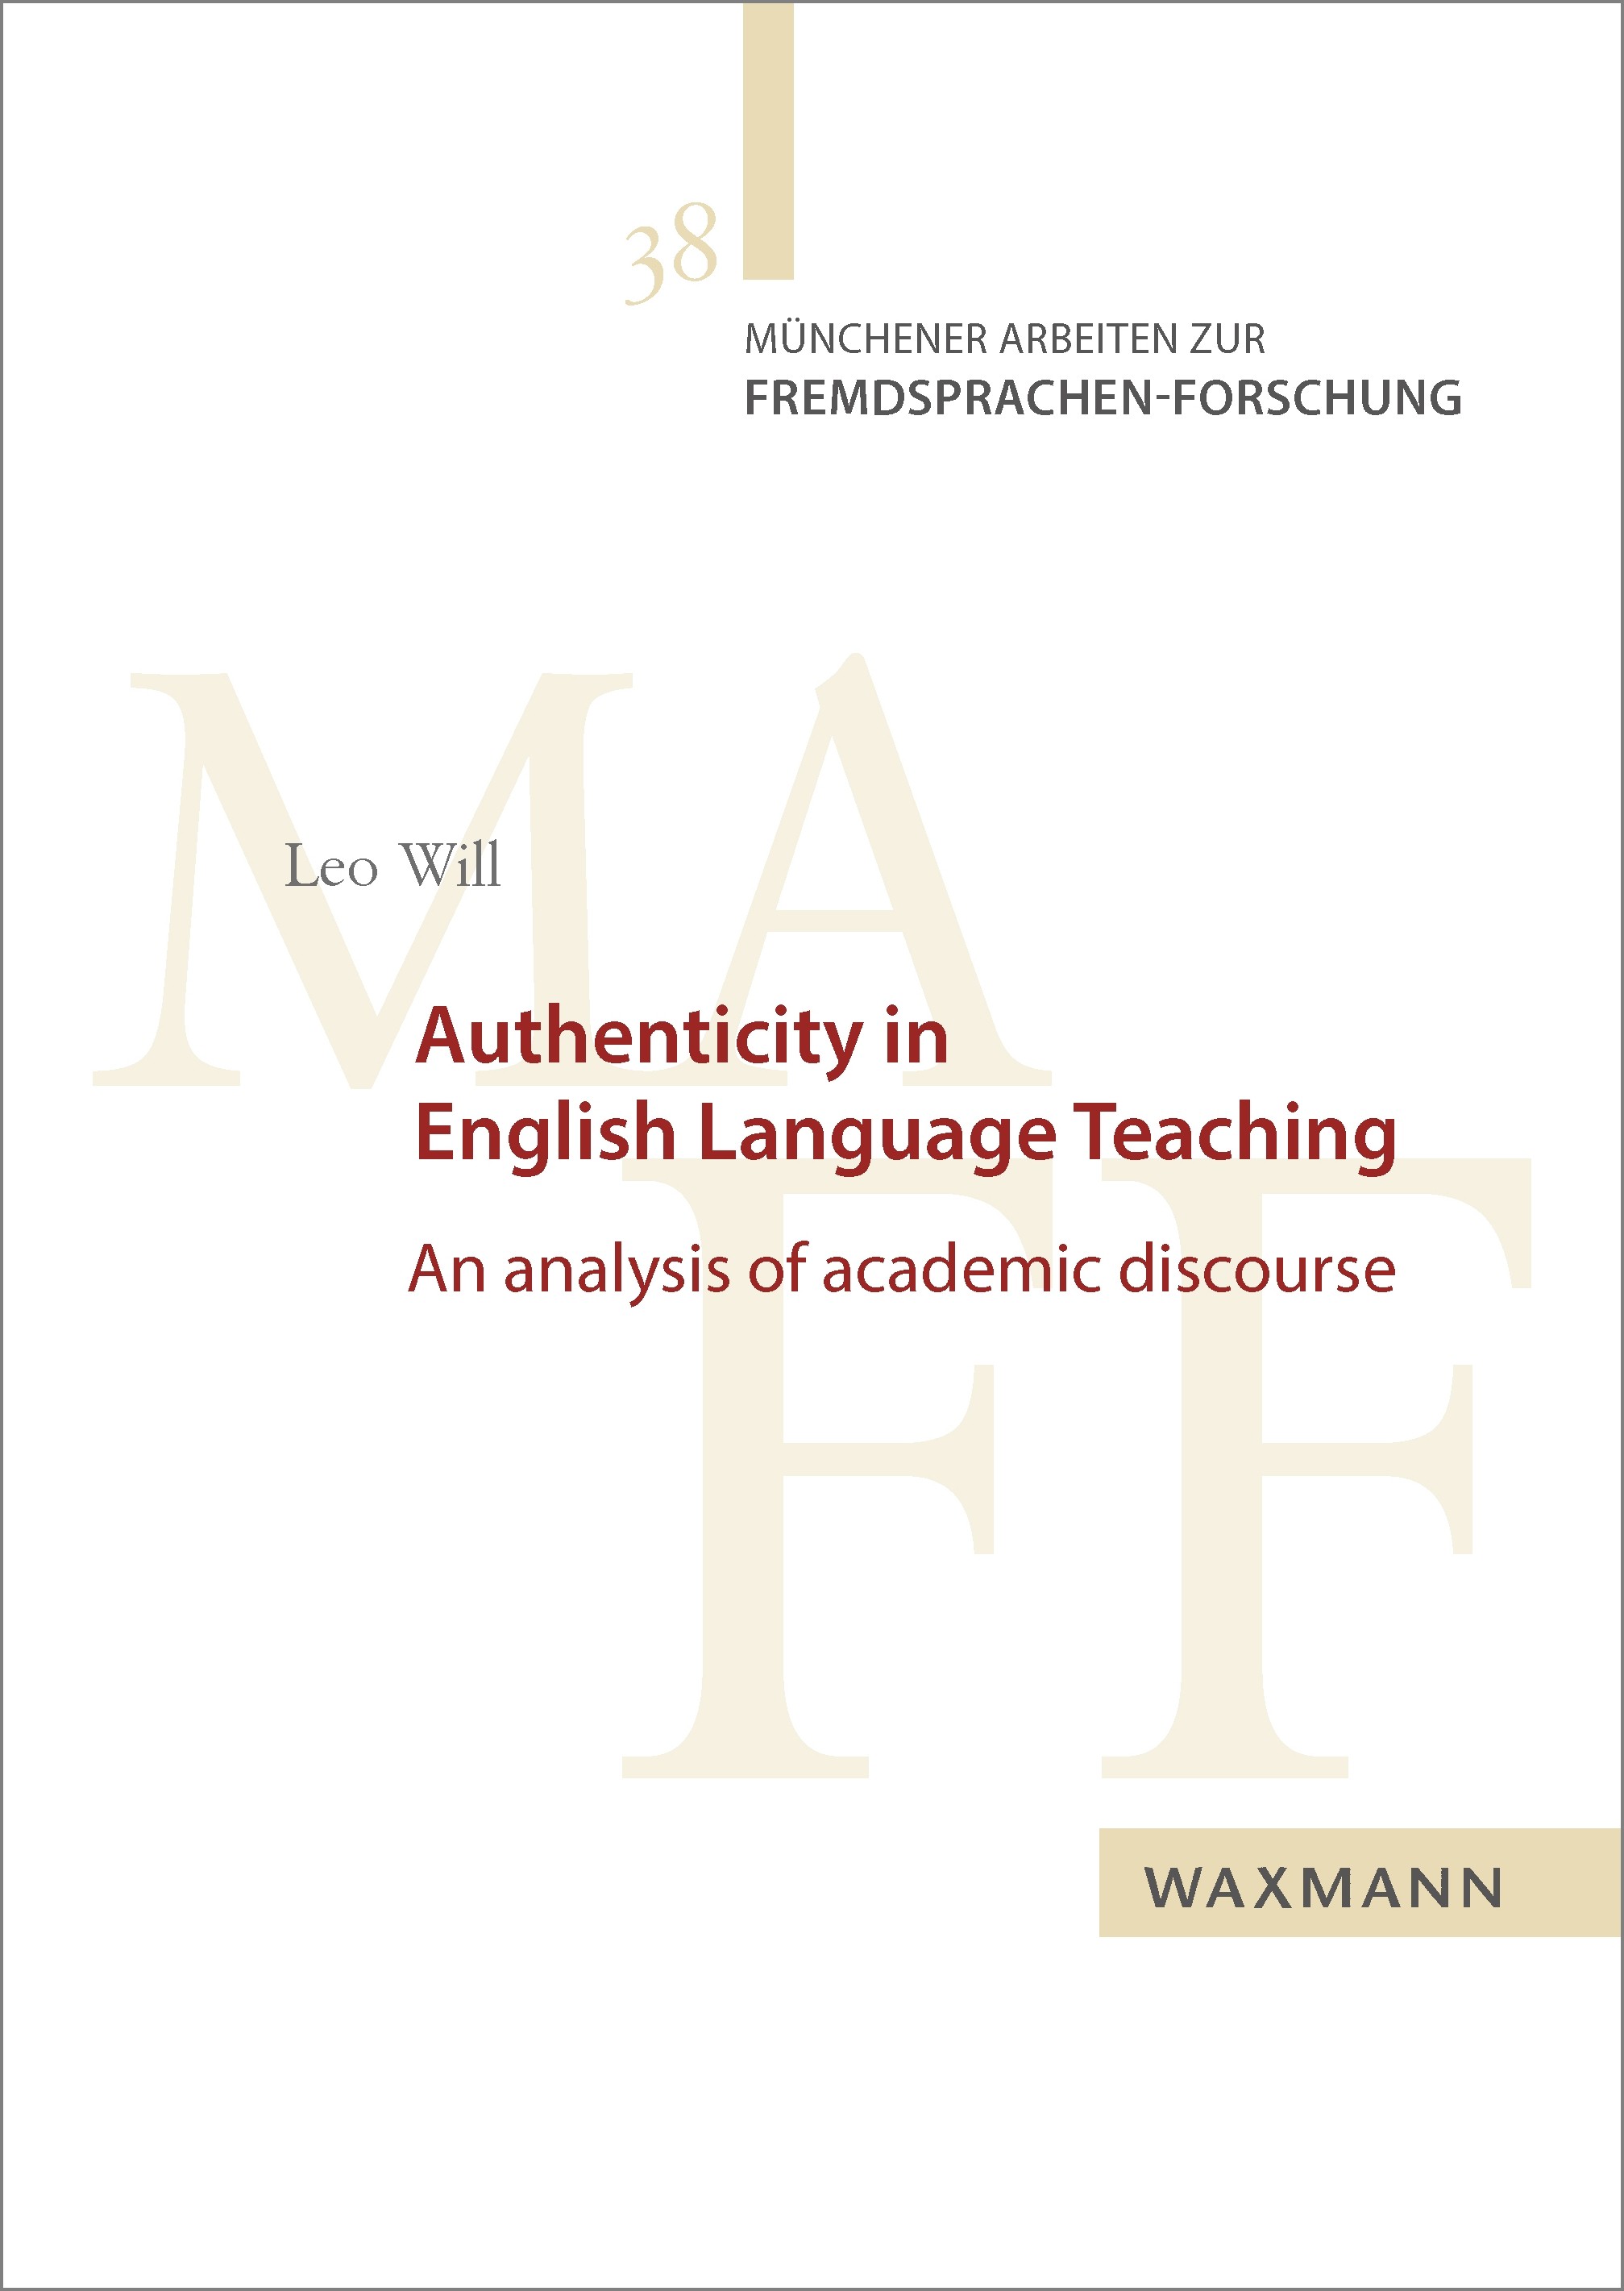 Authenticity in English Language Teaching